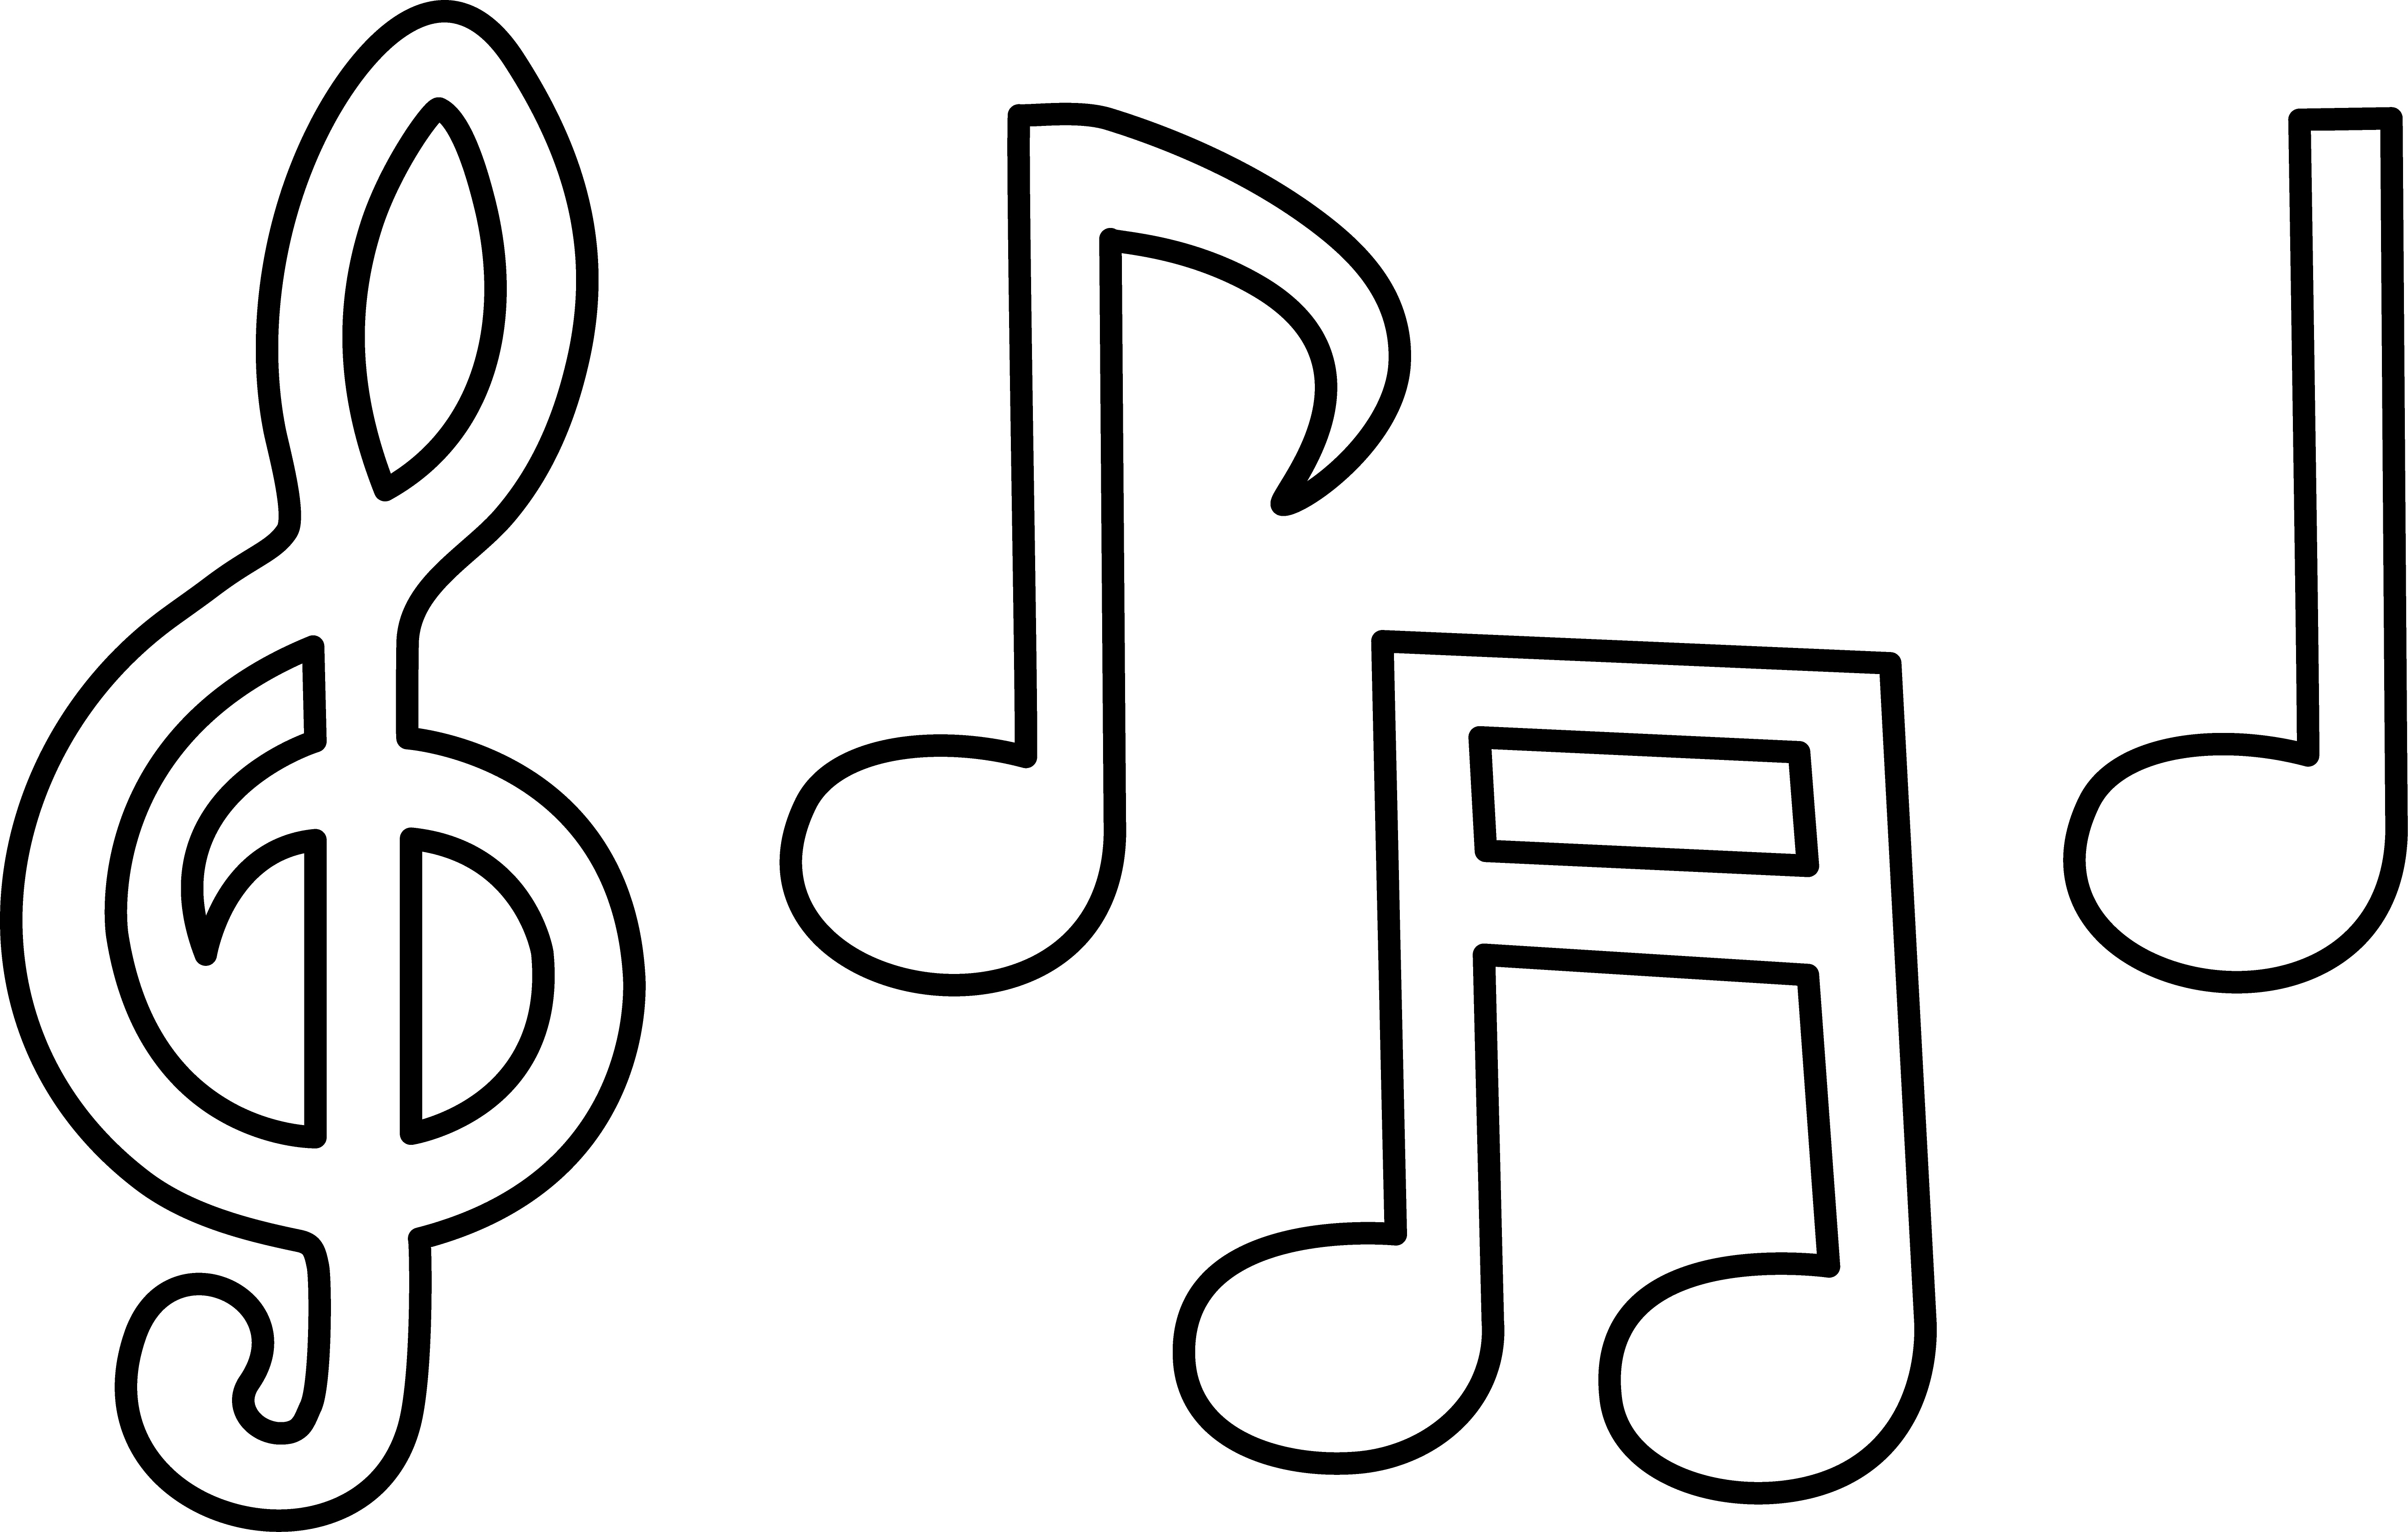 Music Note Symbol Coloring Pages images